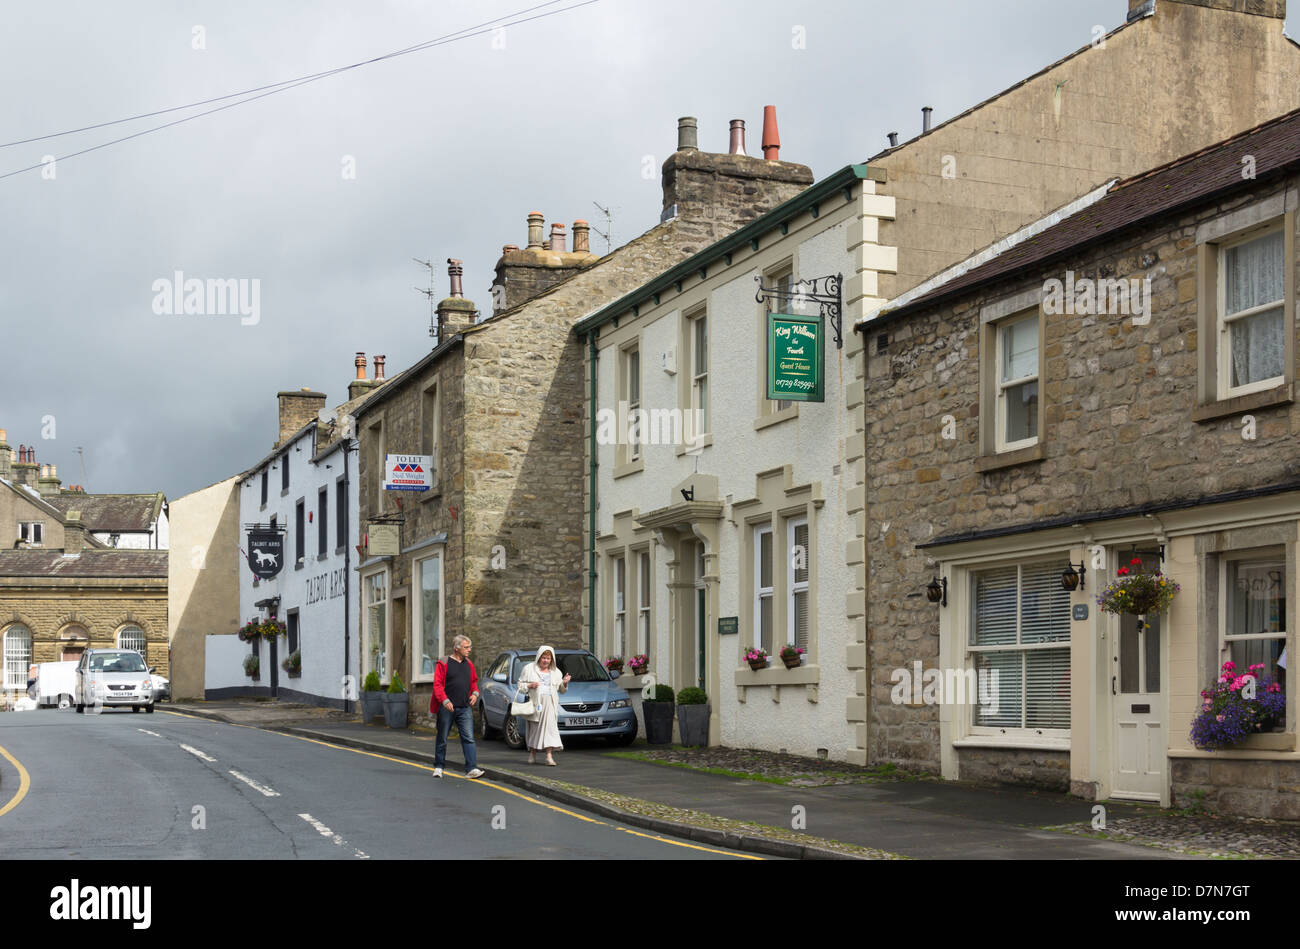 High Street in Settle, North Yorkshire; The guest house' King William the Fourth' and the pub 'Talbot Arms' are prominent. Stock Photo